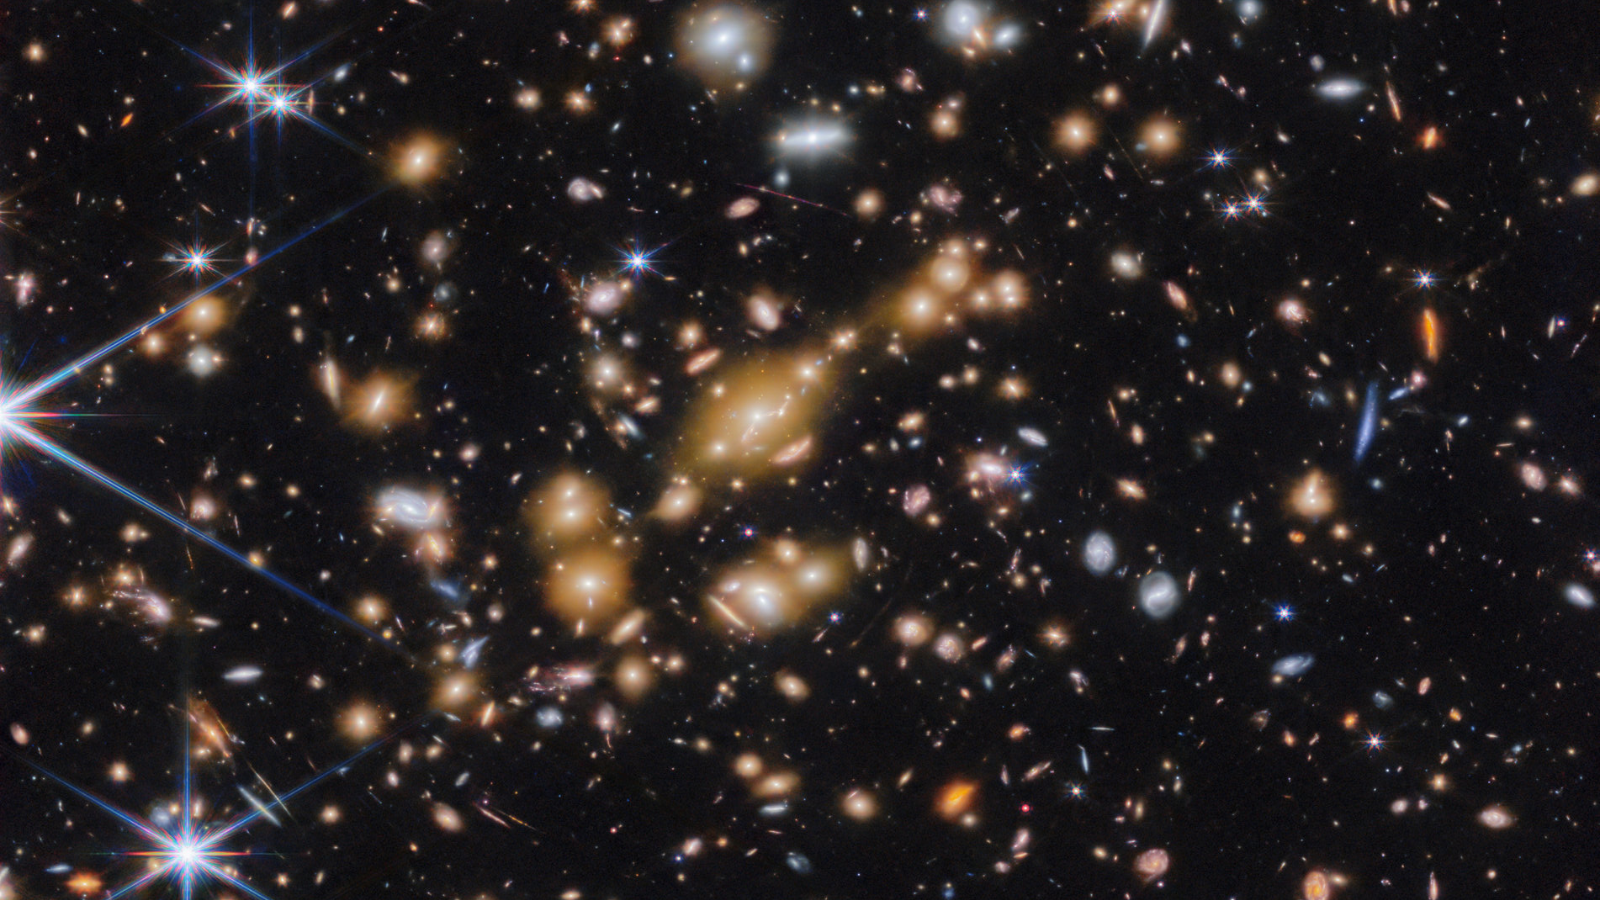 James Webb Space Telescope spots ‘Cosmic Gems’ in the extremely early universe (video) Space